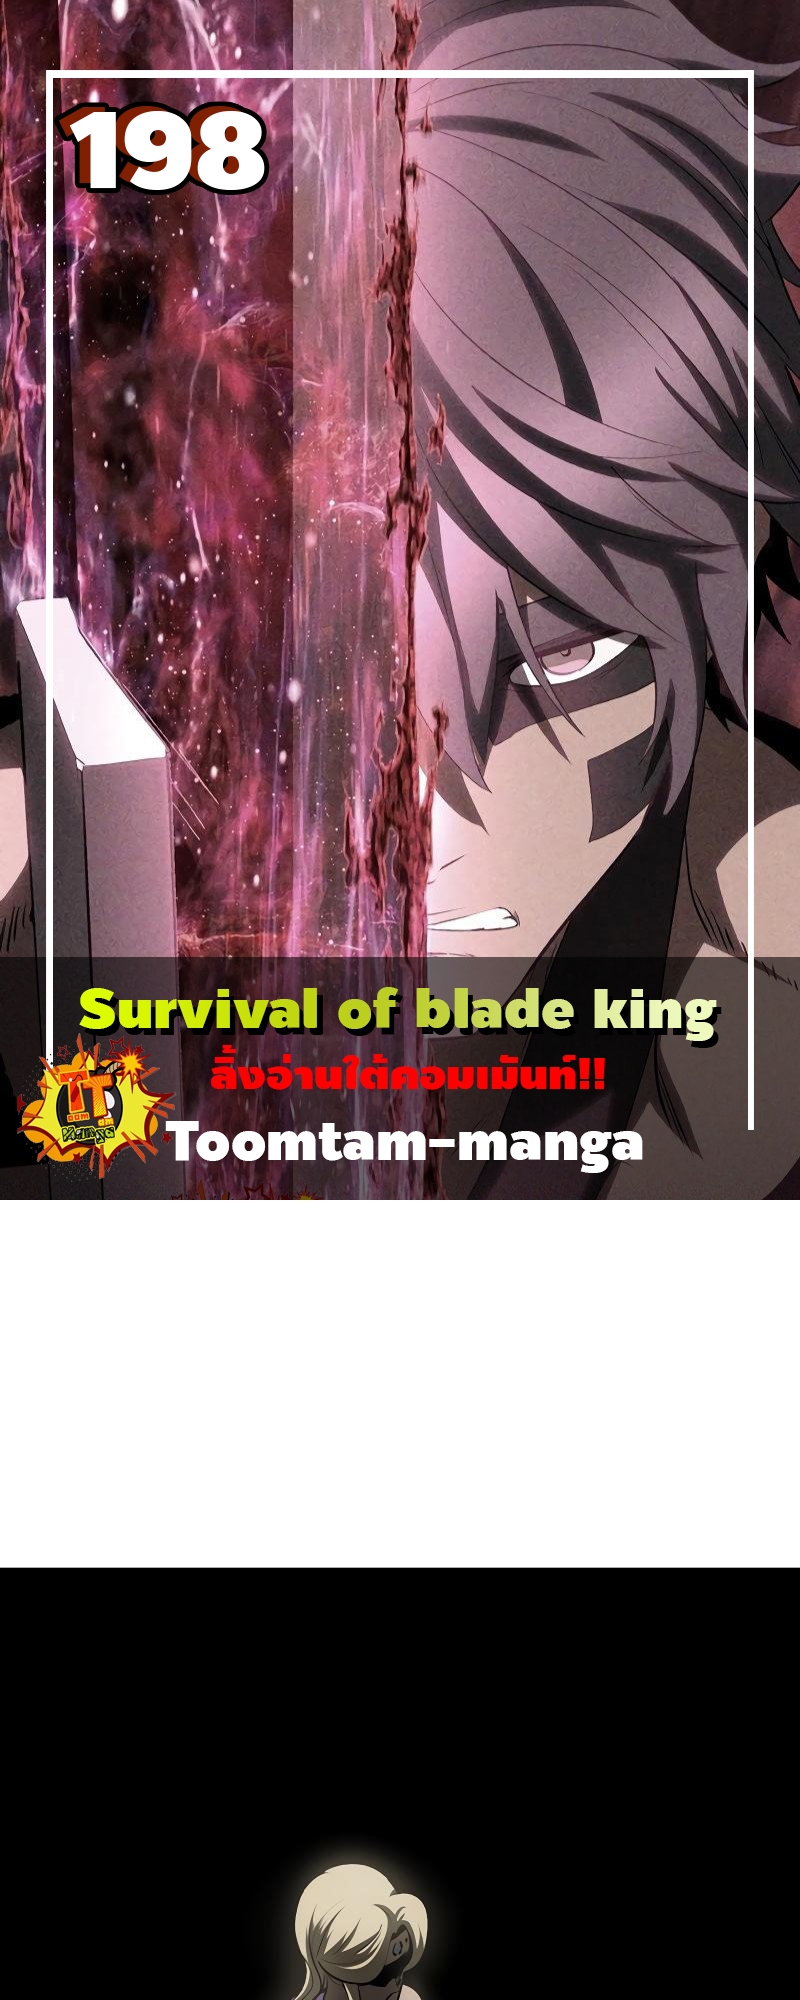 Survival of blade king 198 30 03 25670001